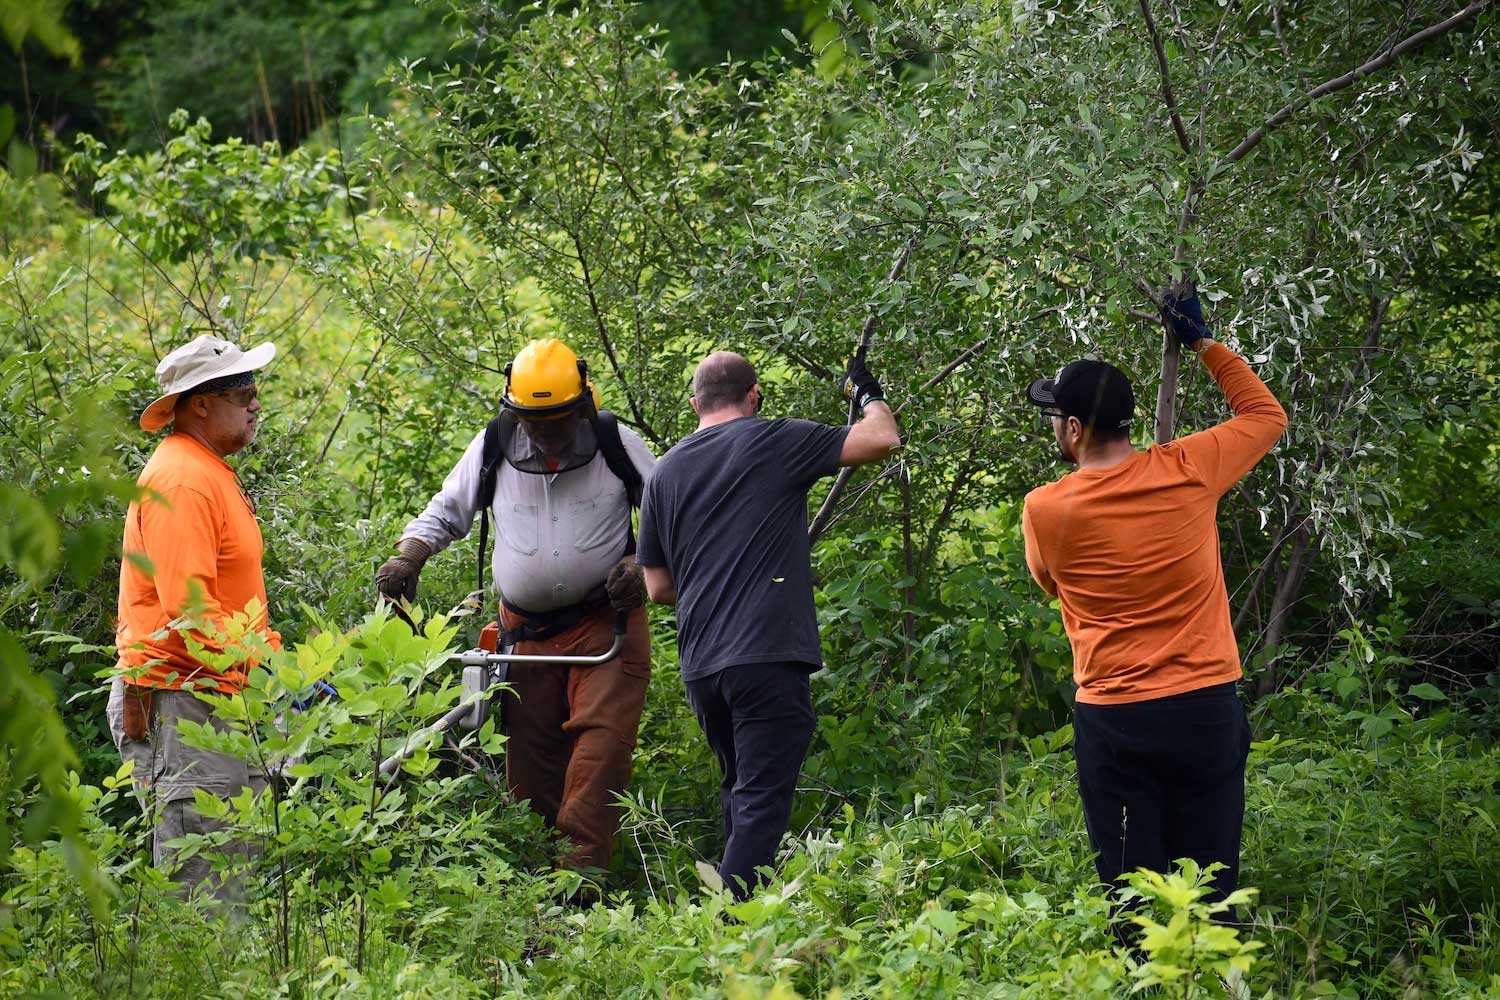 A group of people clearing brush from along a trail.